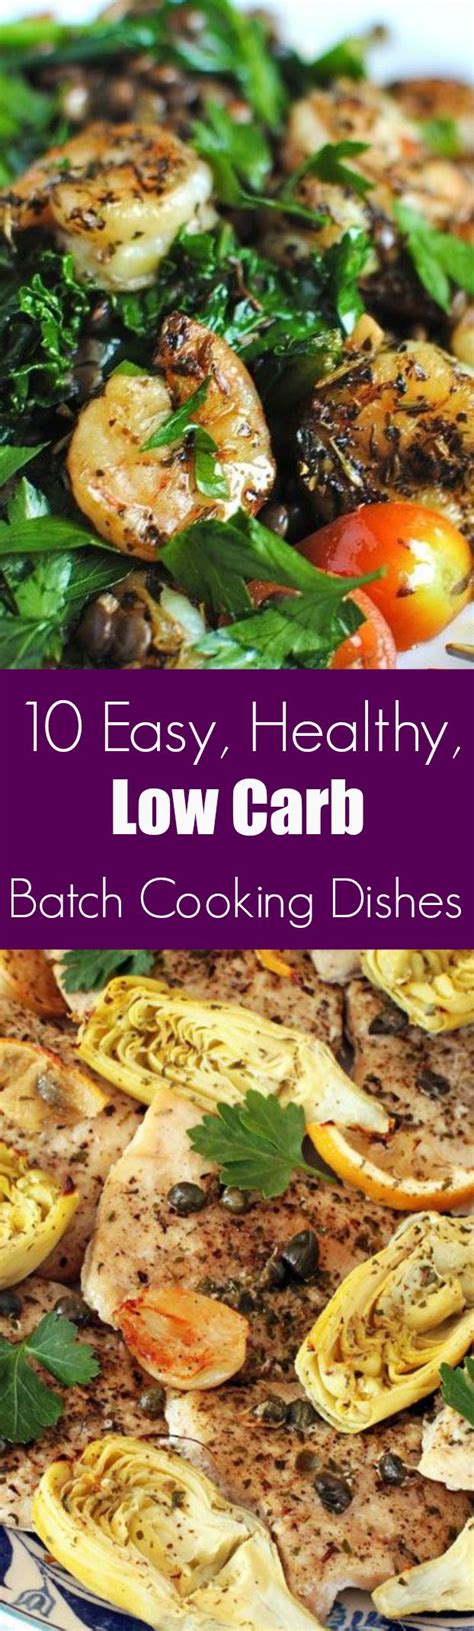 easy healthy tasty batch cooking dishes    carb diet